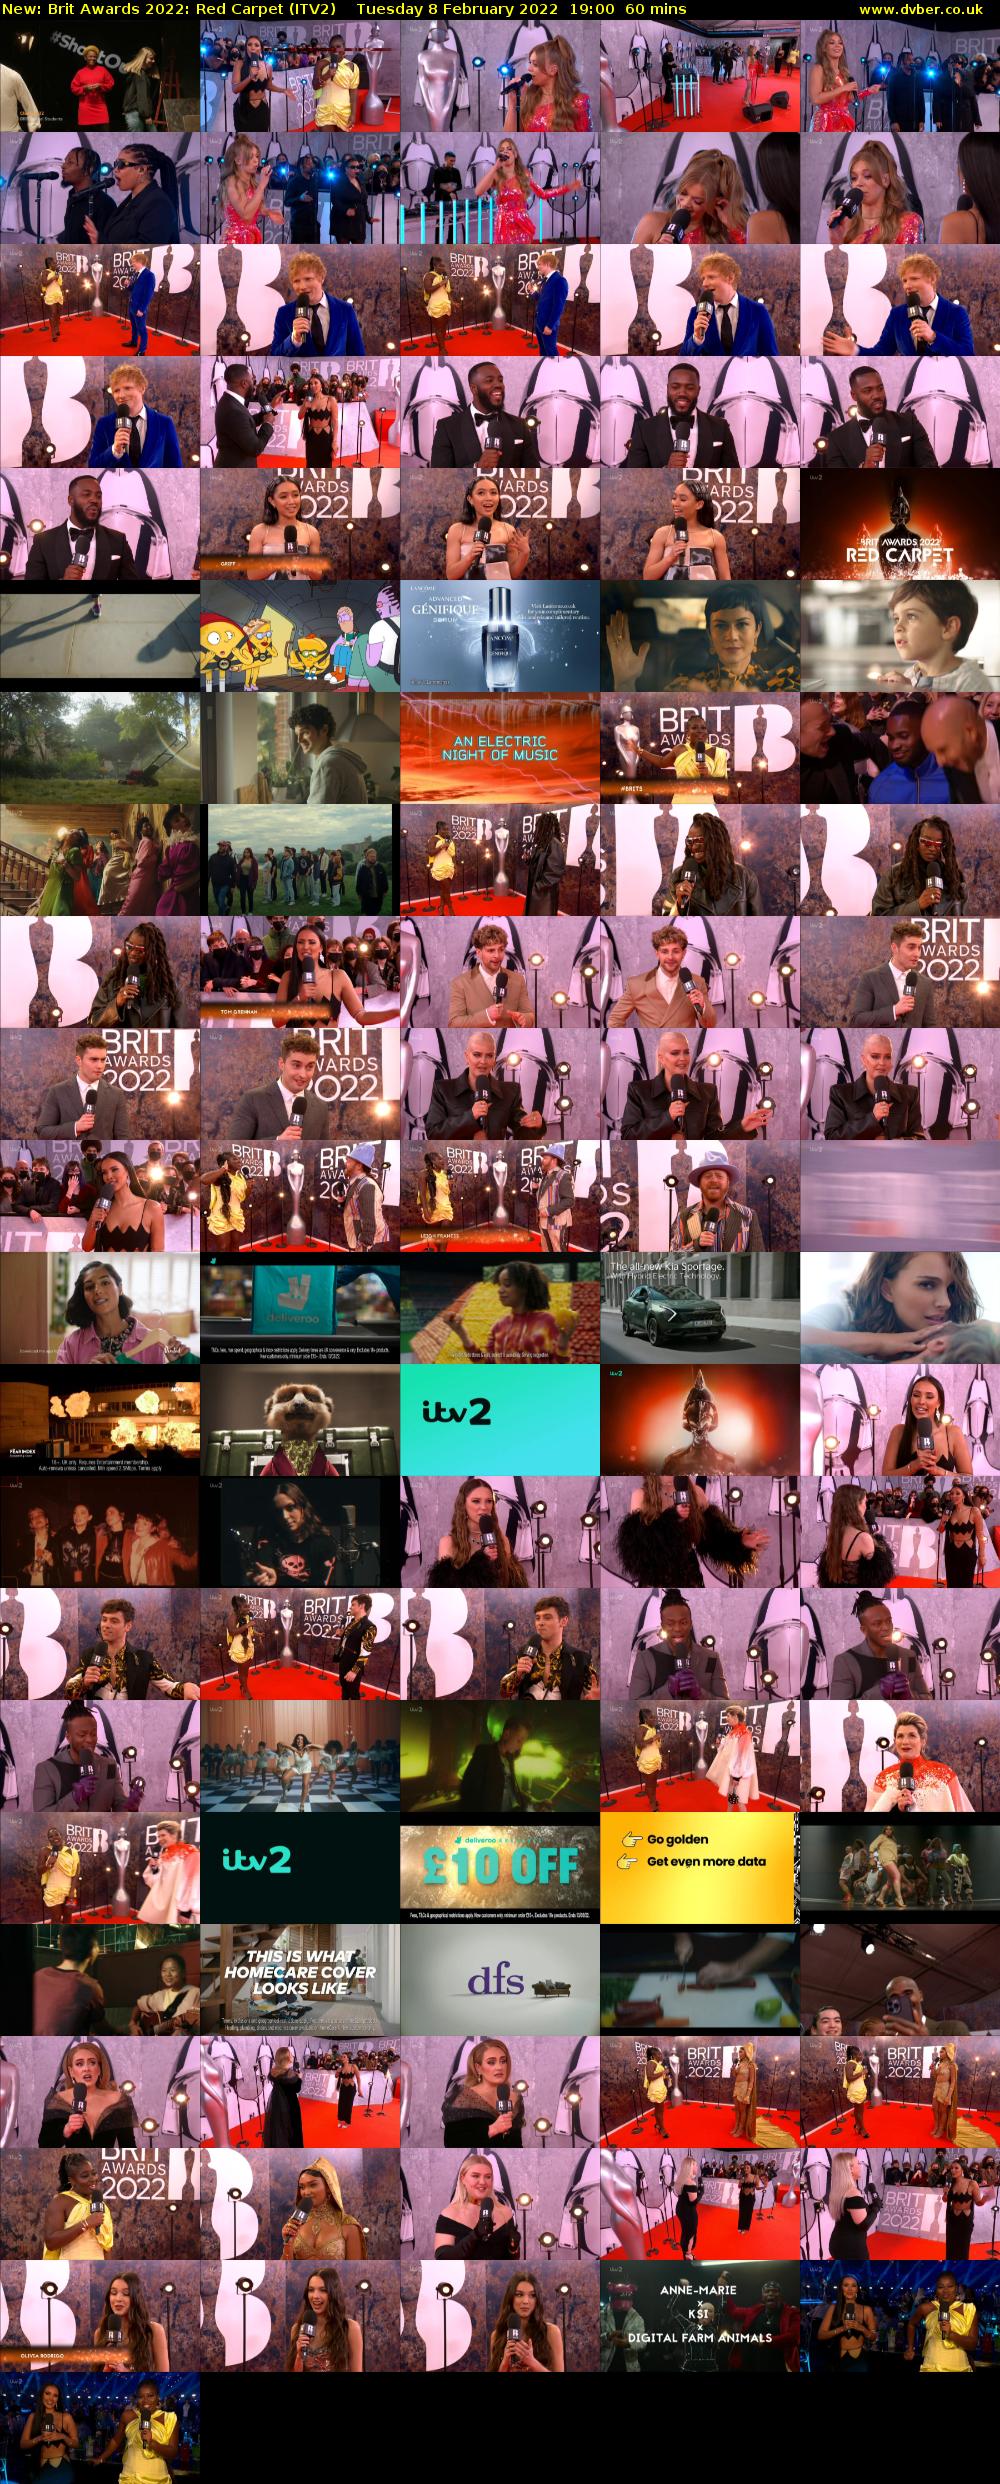 Brit Awards 2022: Red Carpet (ITV2) Tuesday 8 February 2022 19:00 - 20:00